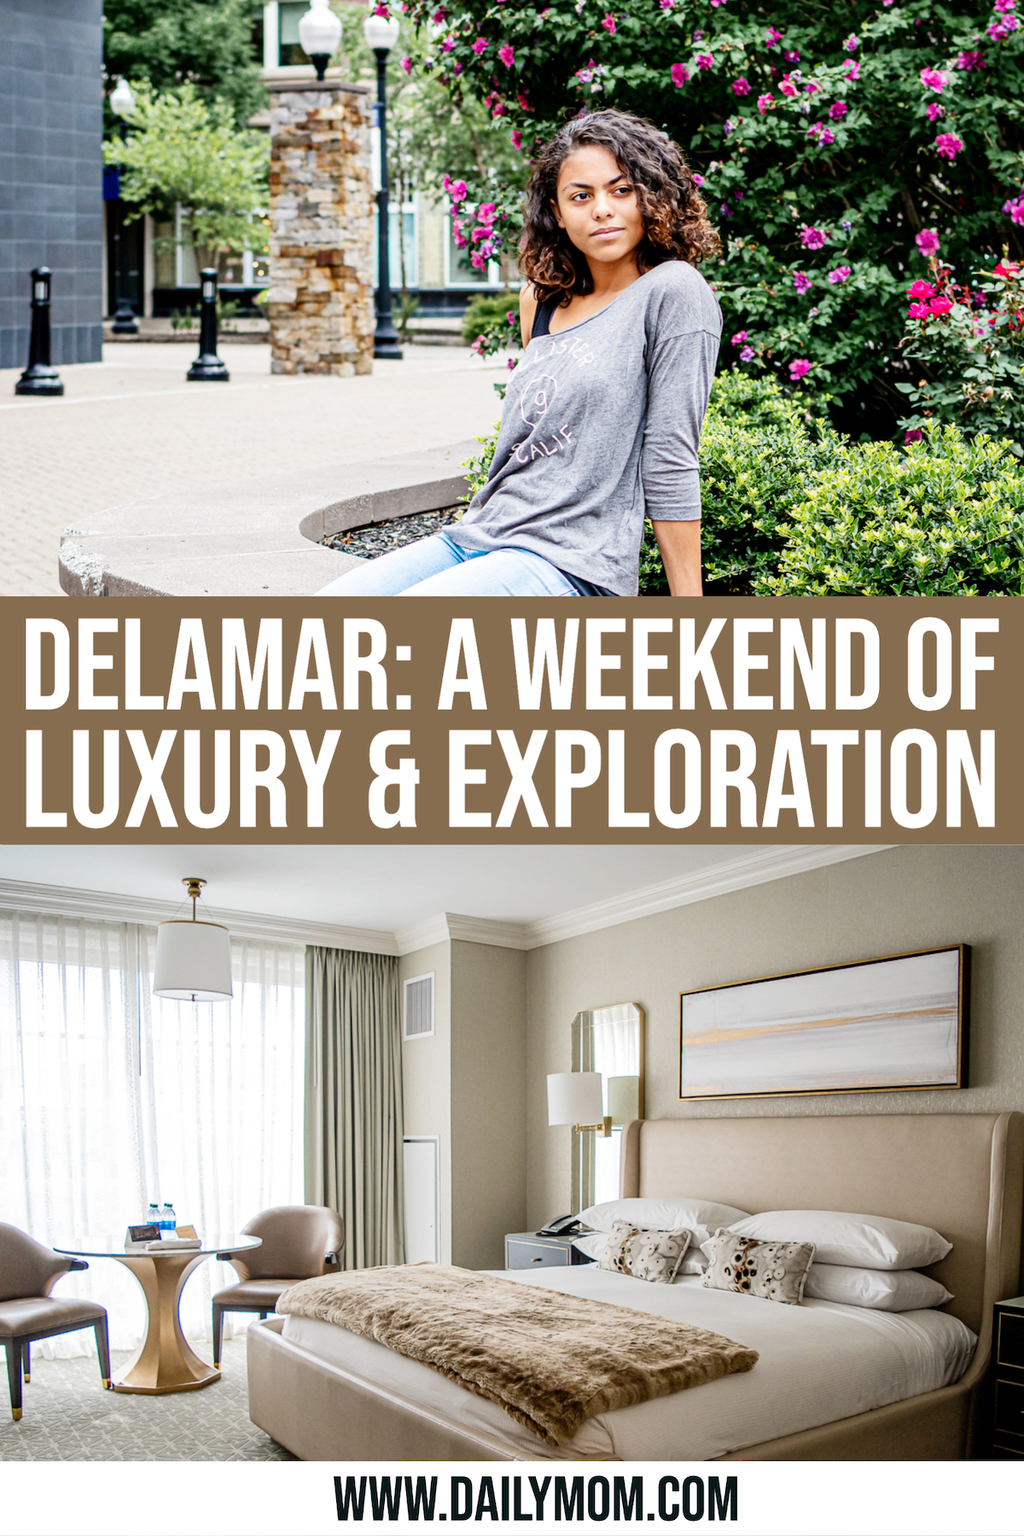 Explore Delamar In 2021: A Life-Changing Luxury Experience In A Single Weekend